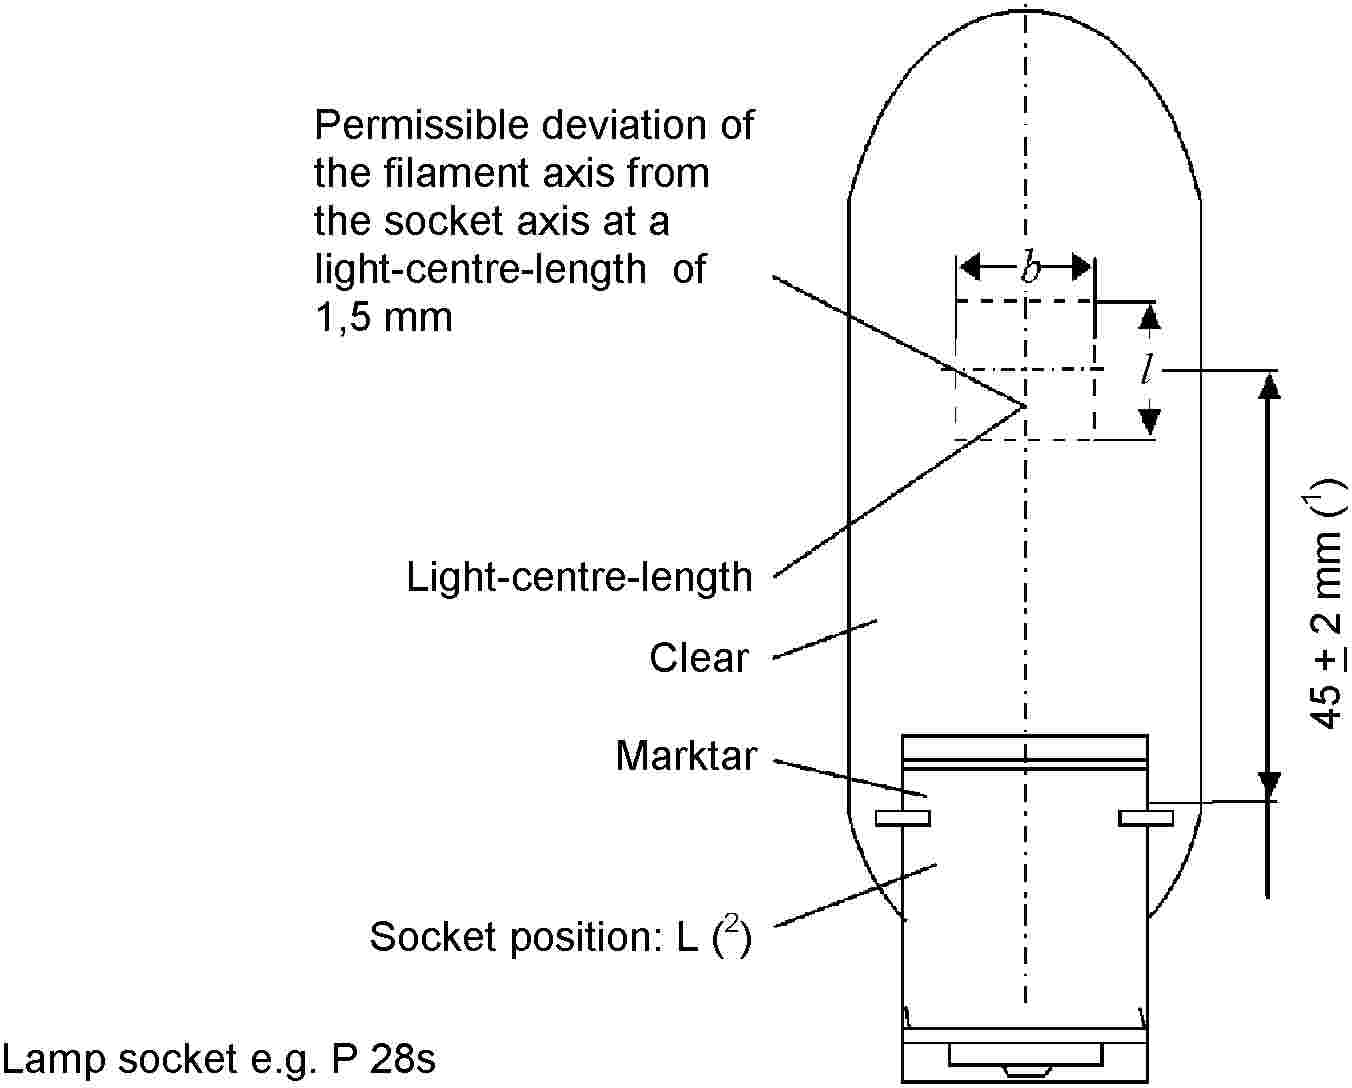 Permissible deviation of the filament axis from the socket axis at a light-centre-length of 1,5 mmLight-centre-lengthClearMarktarSocket position: L (2)Lamp socket e.g. P 28s45 ± 2 mm (1)